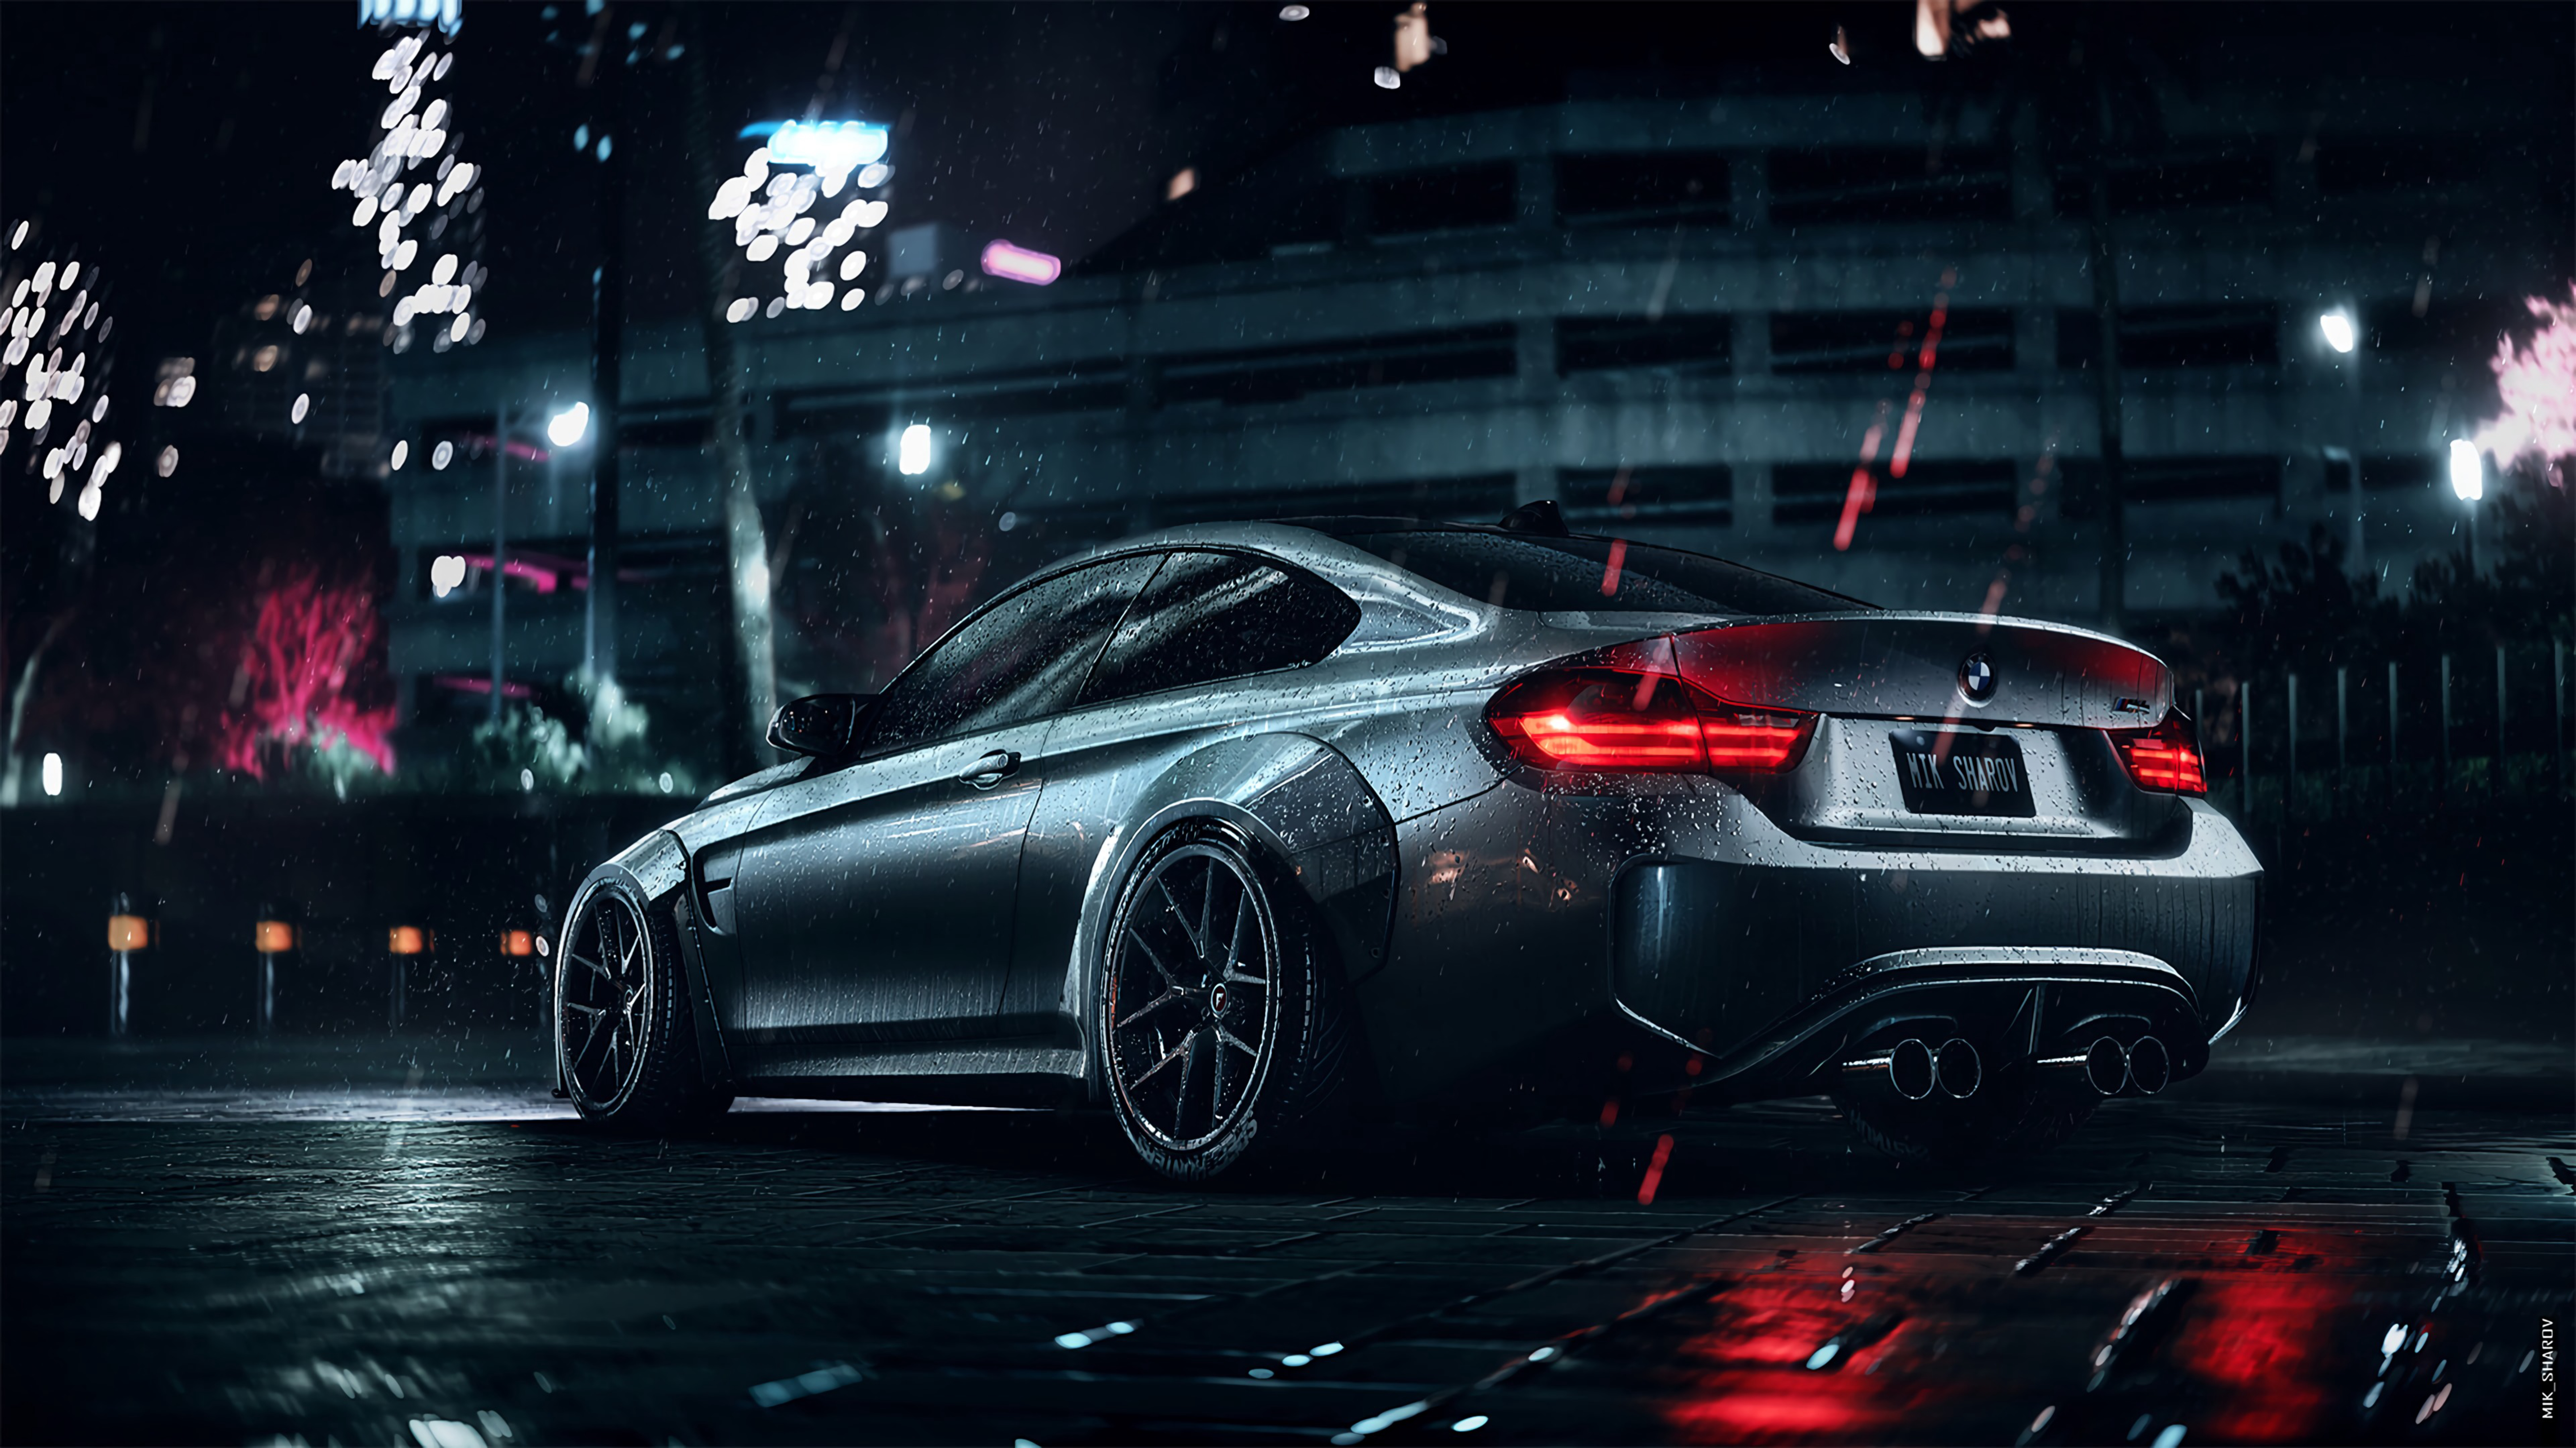 bmw, cars, metallic, car, night, grey, sports, wet, machine, coupe, compartment HD wallpaper